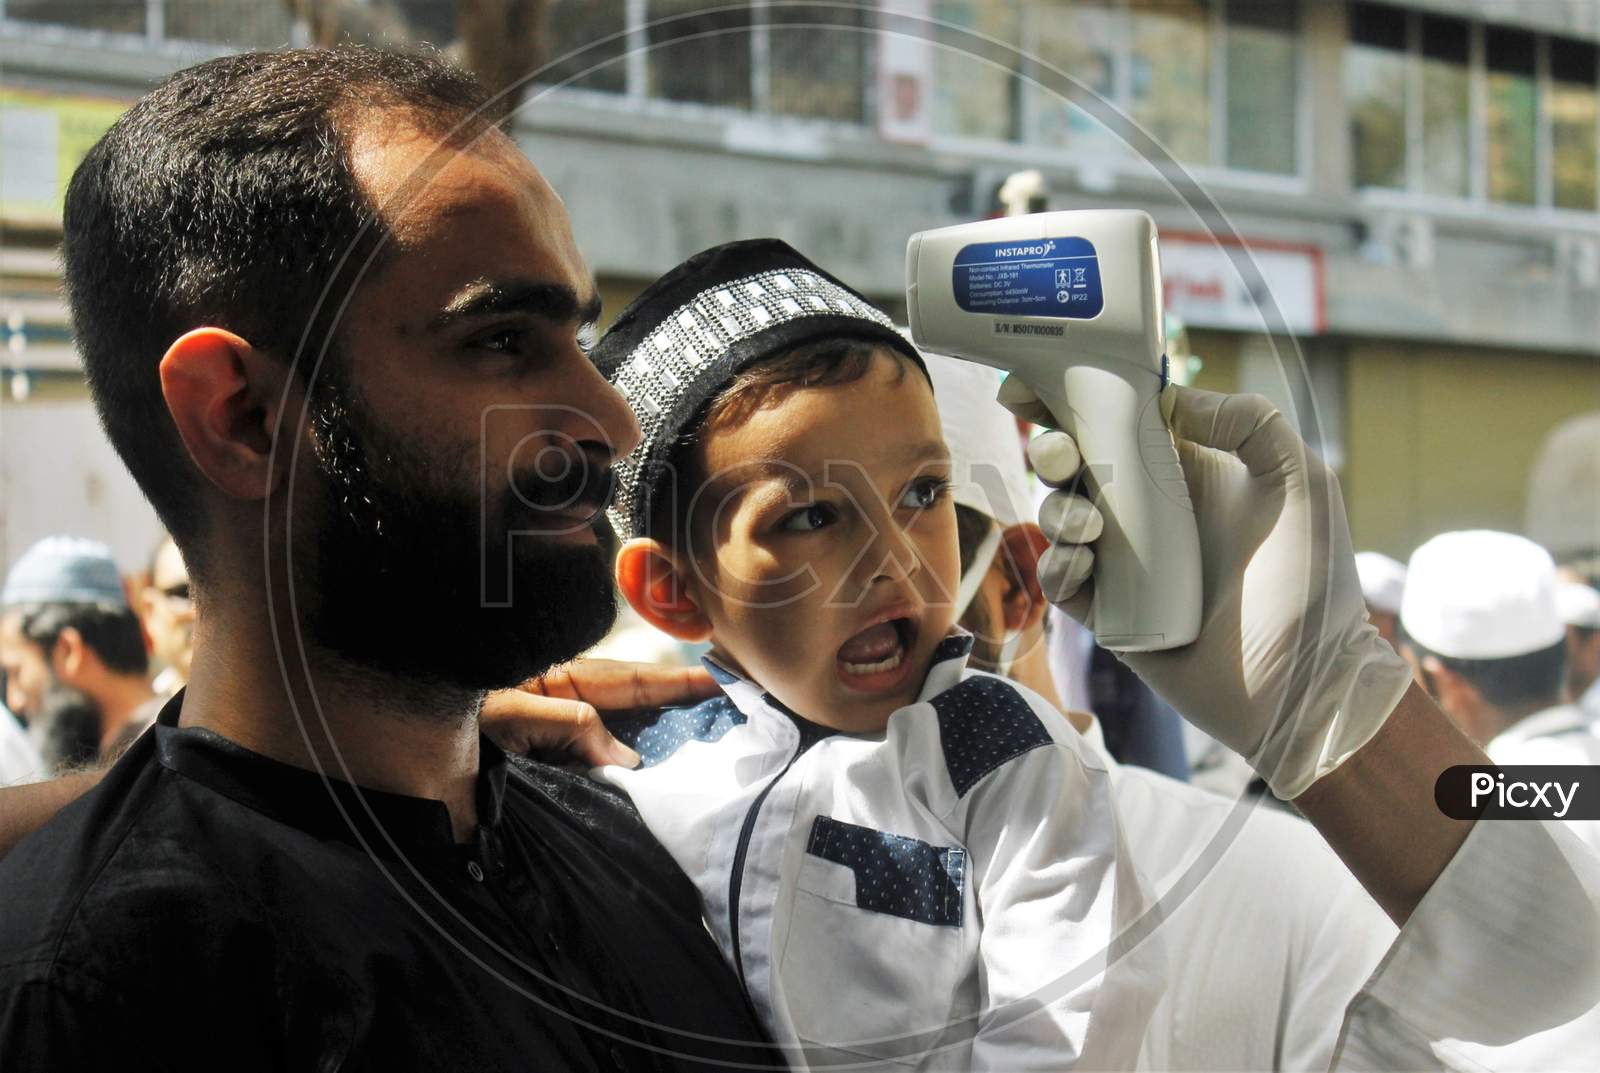 A kid reacts upon a devotee getting scanned with an infrared thermometer to check his temperature as a precautionary measure against coronavirus outside a mosque in Mumbai, India, March 20, 2020.